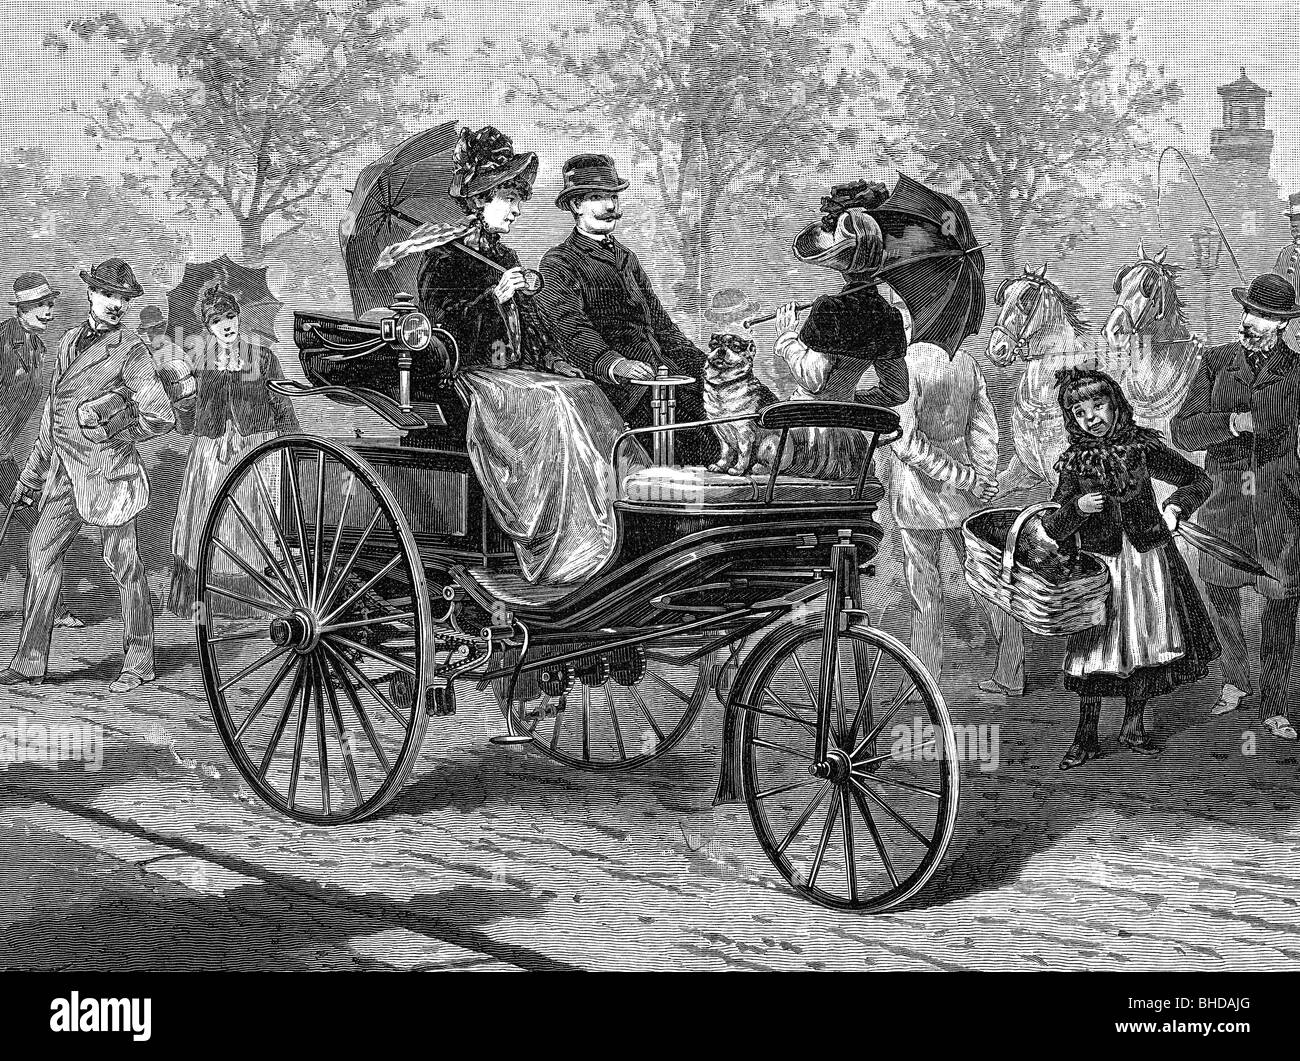 transport / transportation, car, vehicle variants, Benz, Patent-Motorwagen 3, wood engraving, 1888, 19th century, graphic, graphics, Germany, German Empire, driving, motor car, auto, passenger car, motorcar, motorcars, autos, passenger cars, autocar, automobile, autocars, automobiles, power-driven vehicle, motor vehicle, motor vehicles, driving machine, vehicle, vehicles, transport, transportation, car, cars, historic, historical, people, Stock Photo